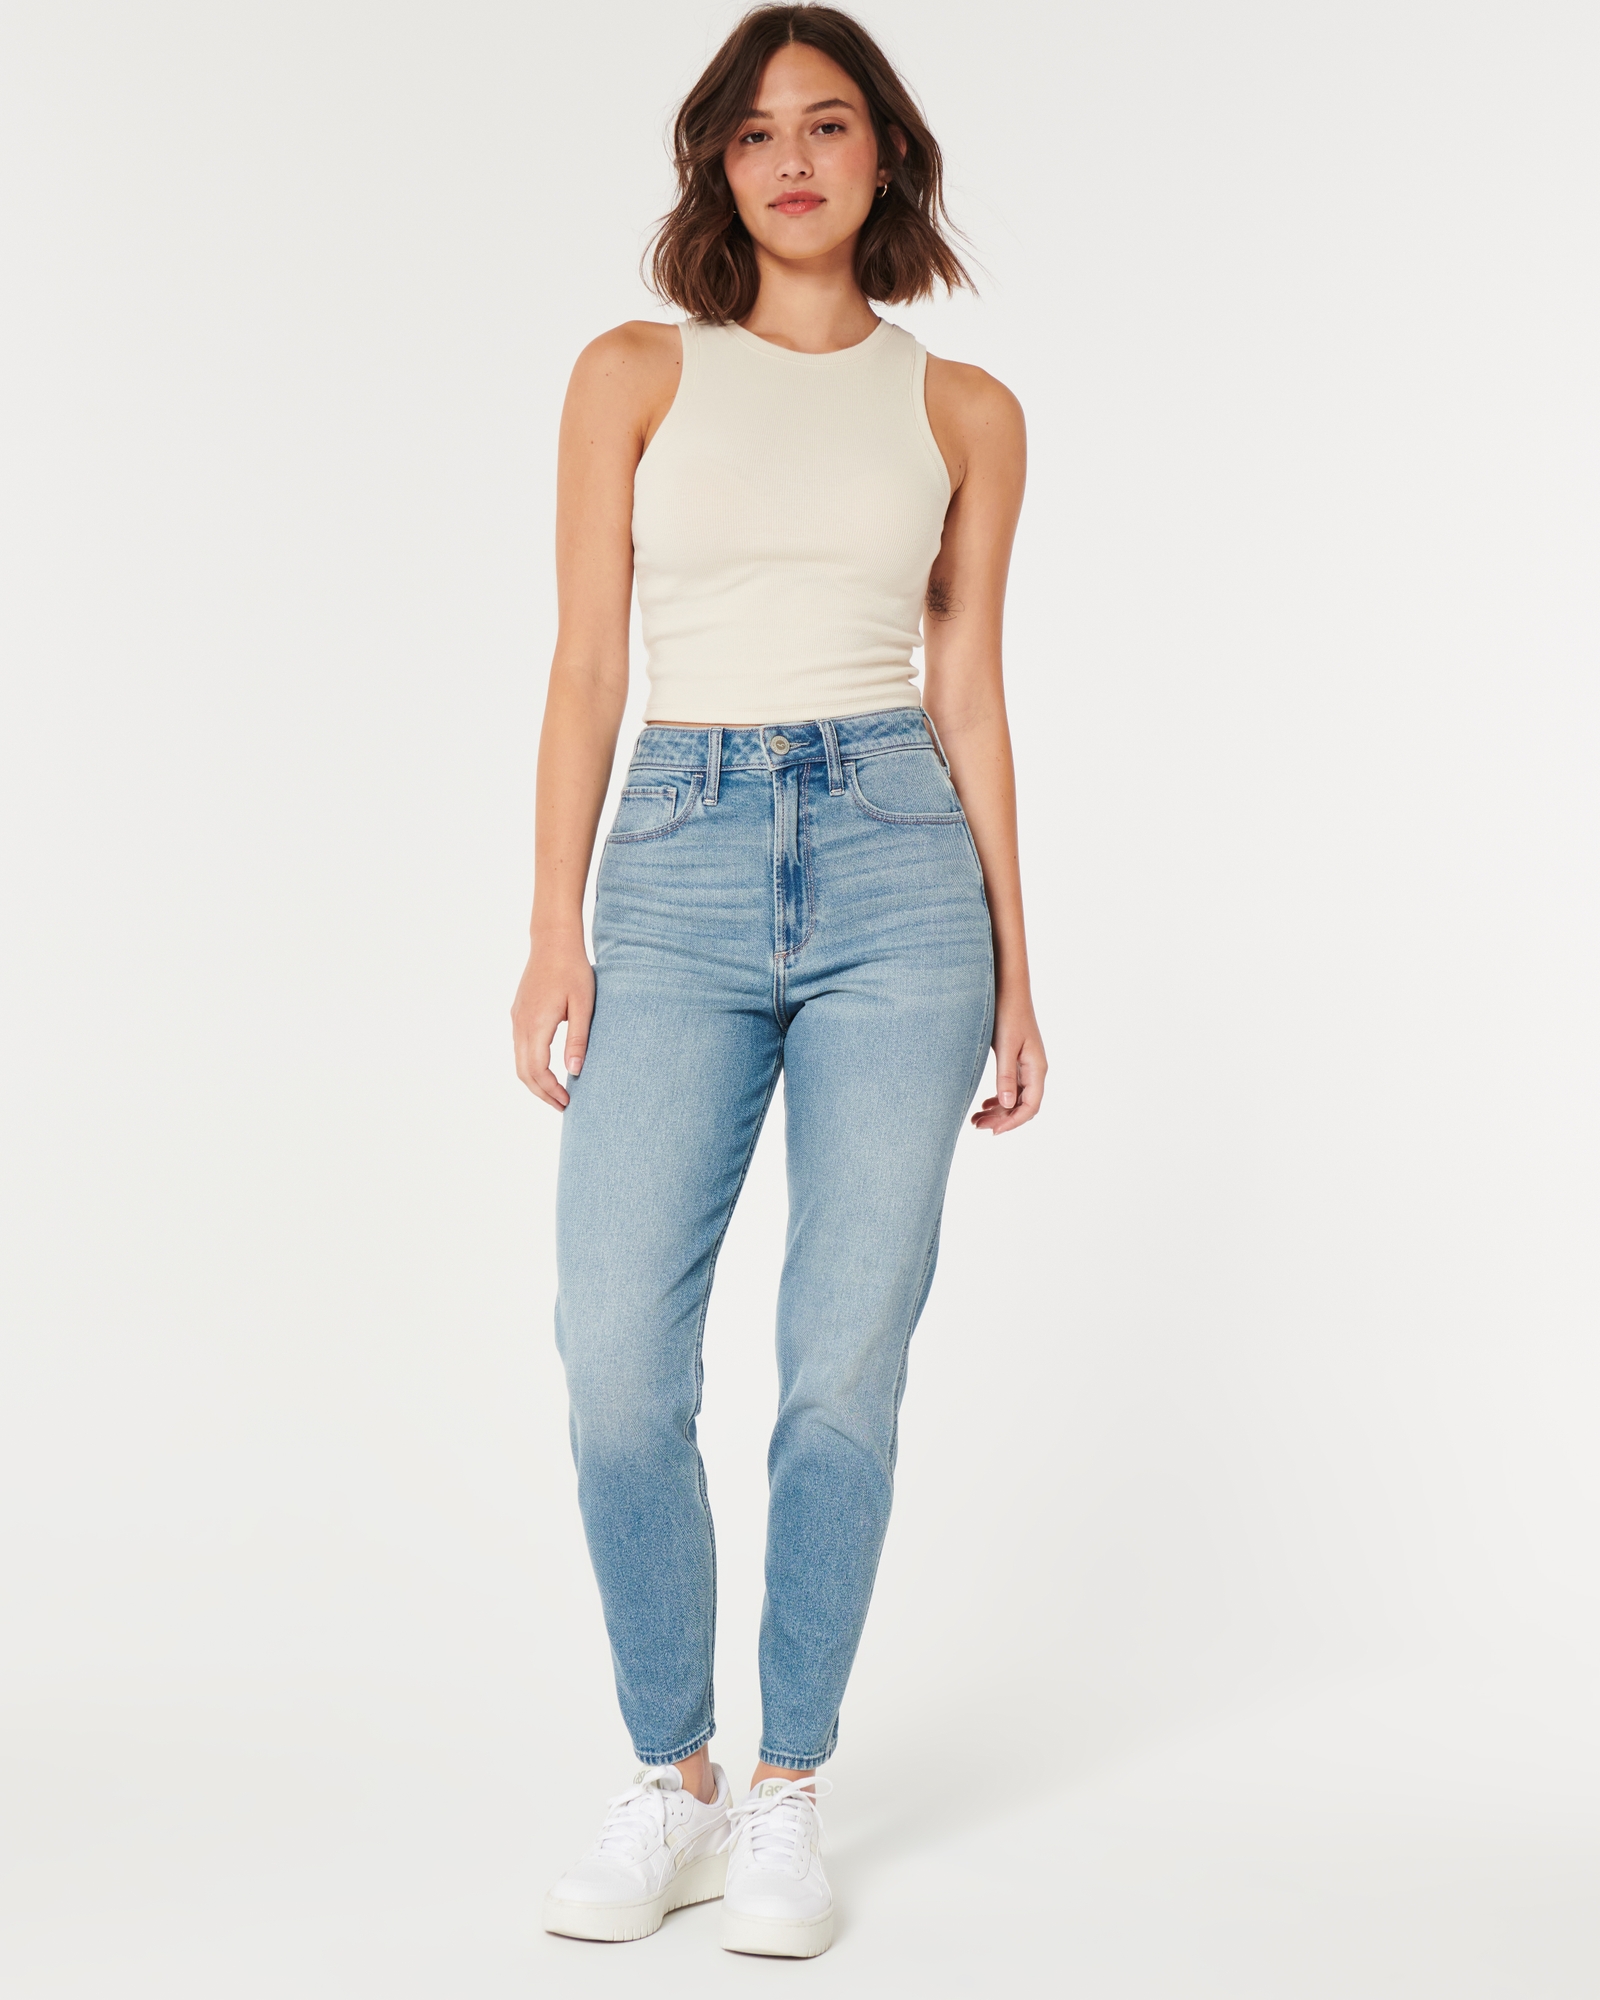 https://img.hollisterco.com/is/image/anf/KIC_355-3276-0774-278_model1.jpg?policy=product-extra-large